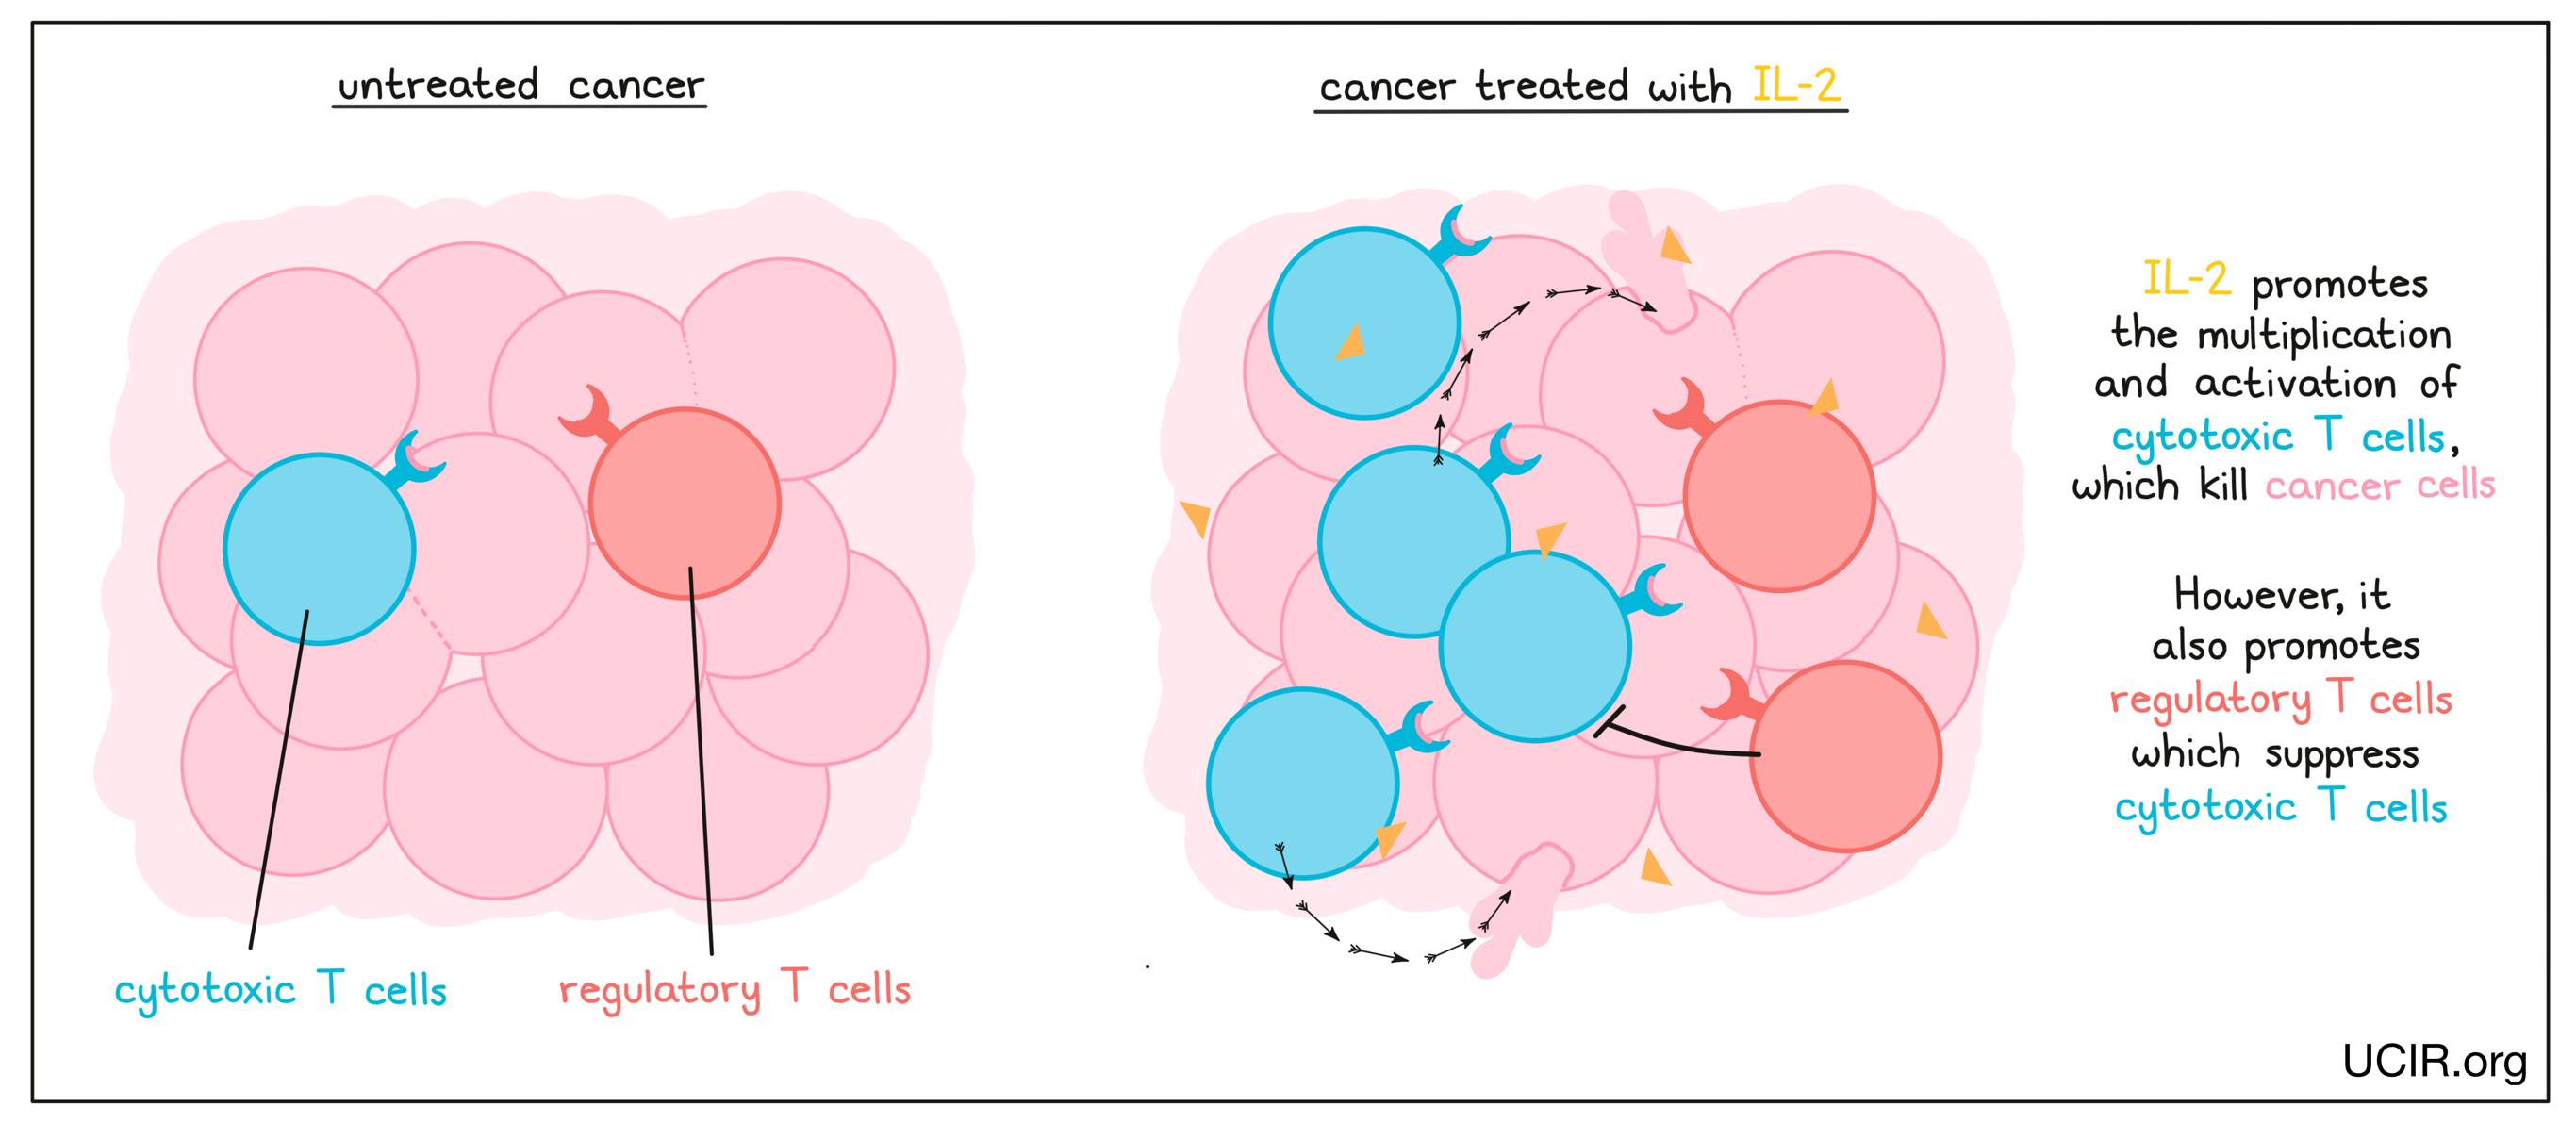 Illustration showing the difference between an untreated cancer vs a cancer treated with IL-2